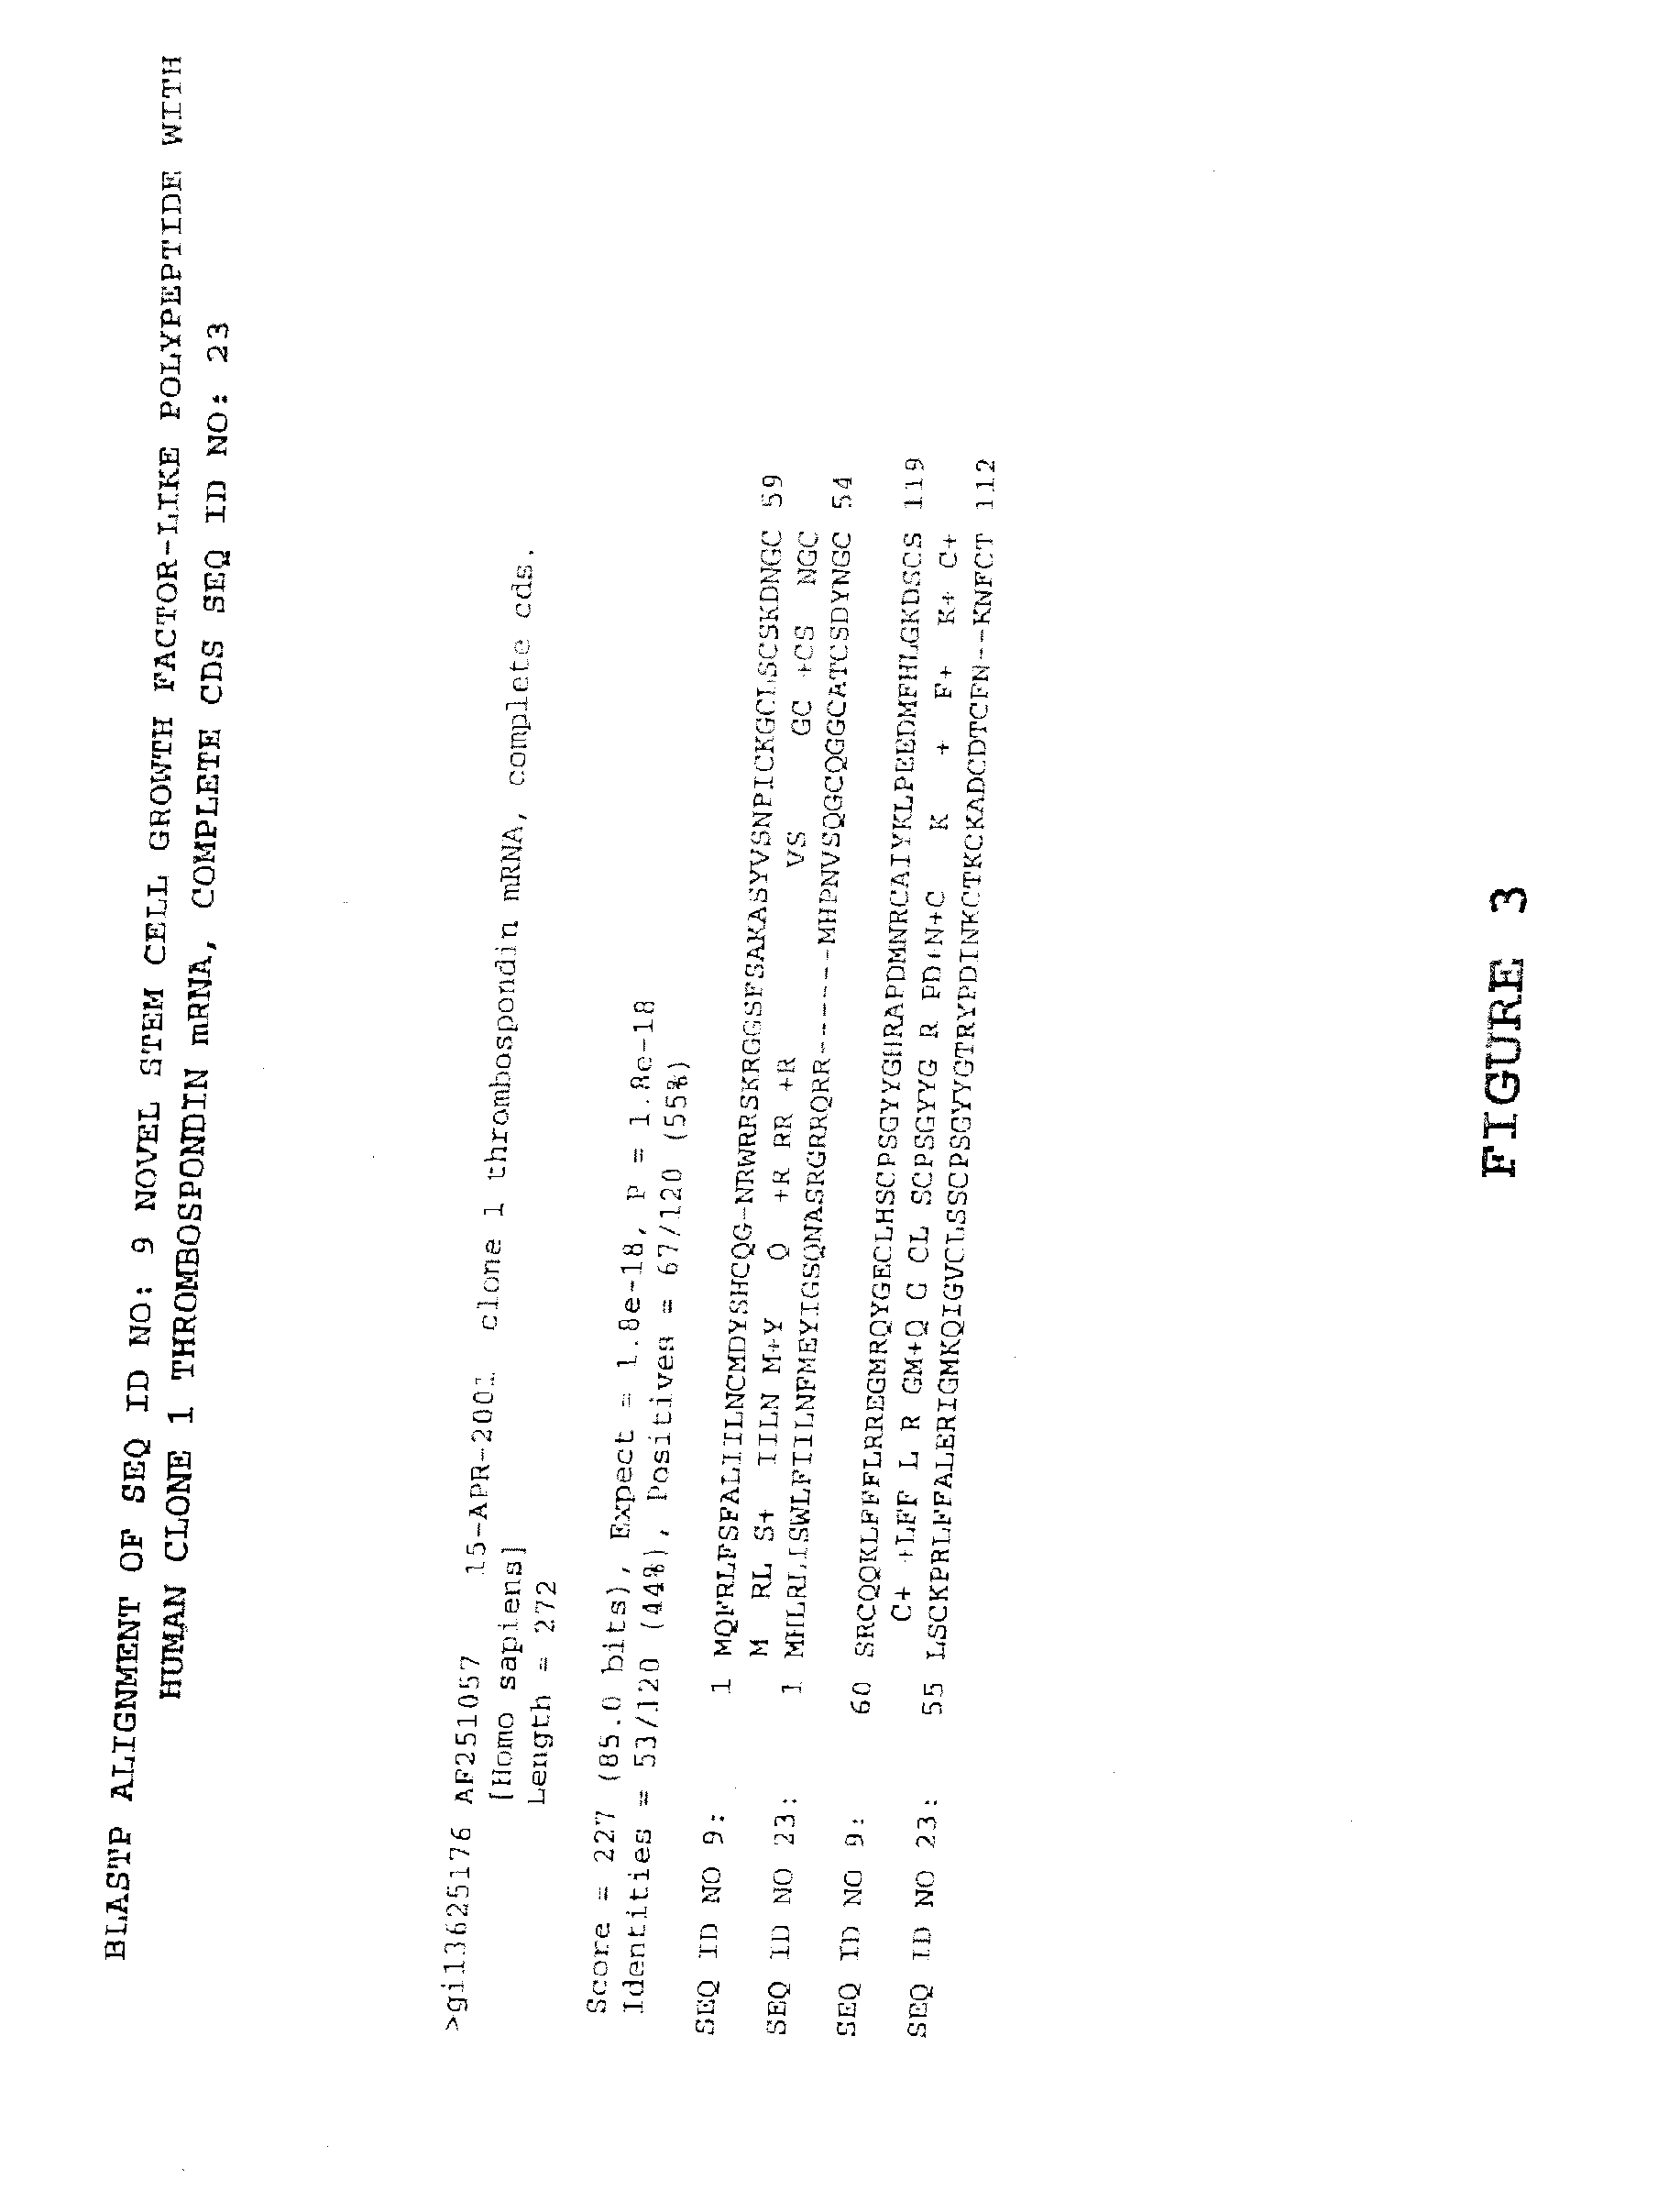 Methods and materials relating to stem cell growth factor-like polypeptides and polynucleotides